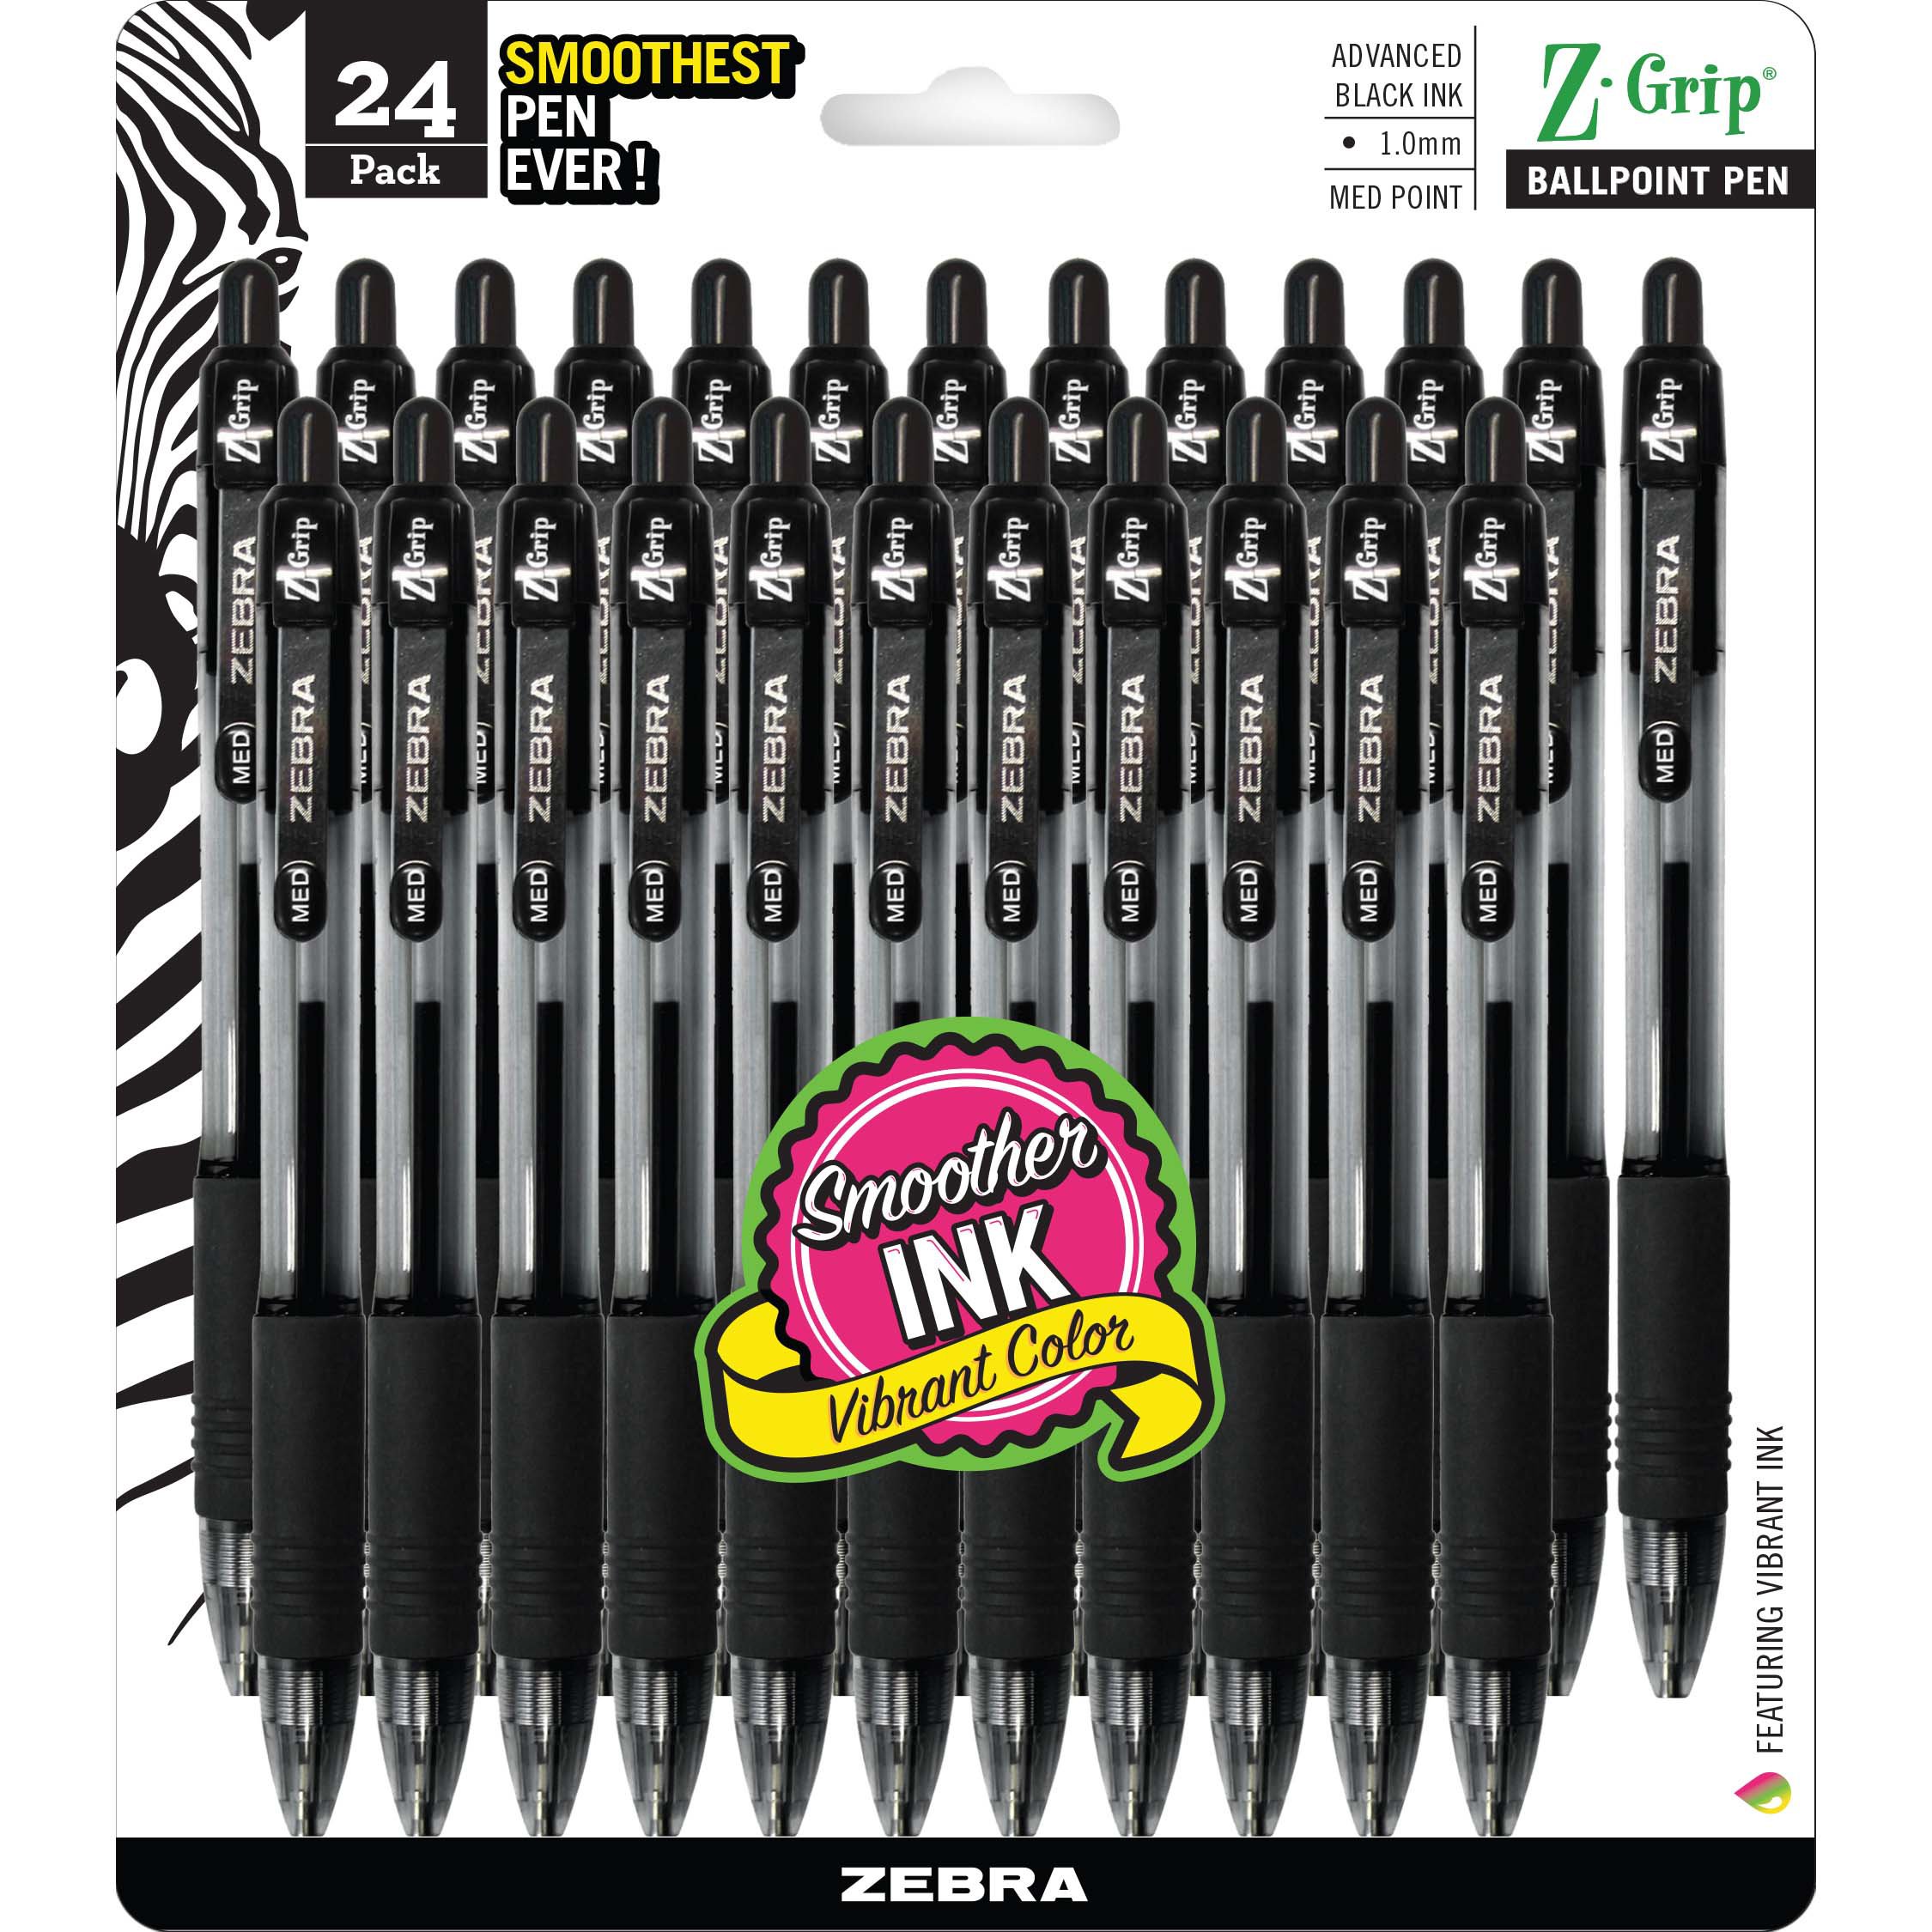 Zebra Pen - Excellence doesn't mean you are the best, but